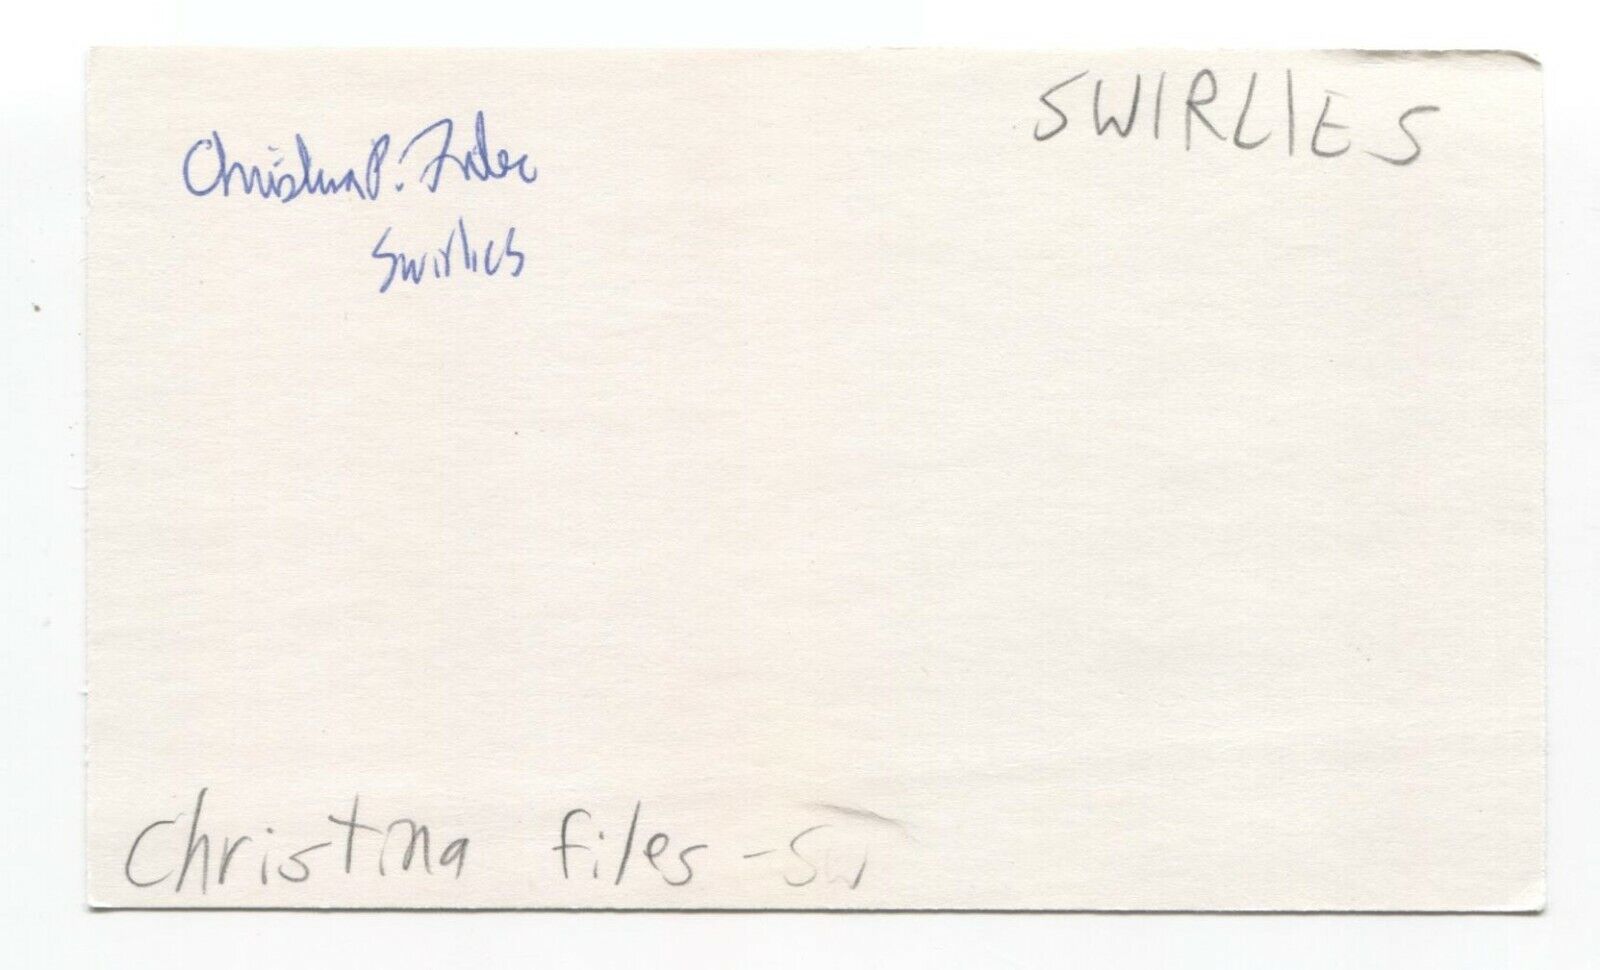 Swirlies - Christina Files Signed 3x5 Index Card Autographed Signature